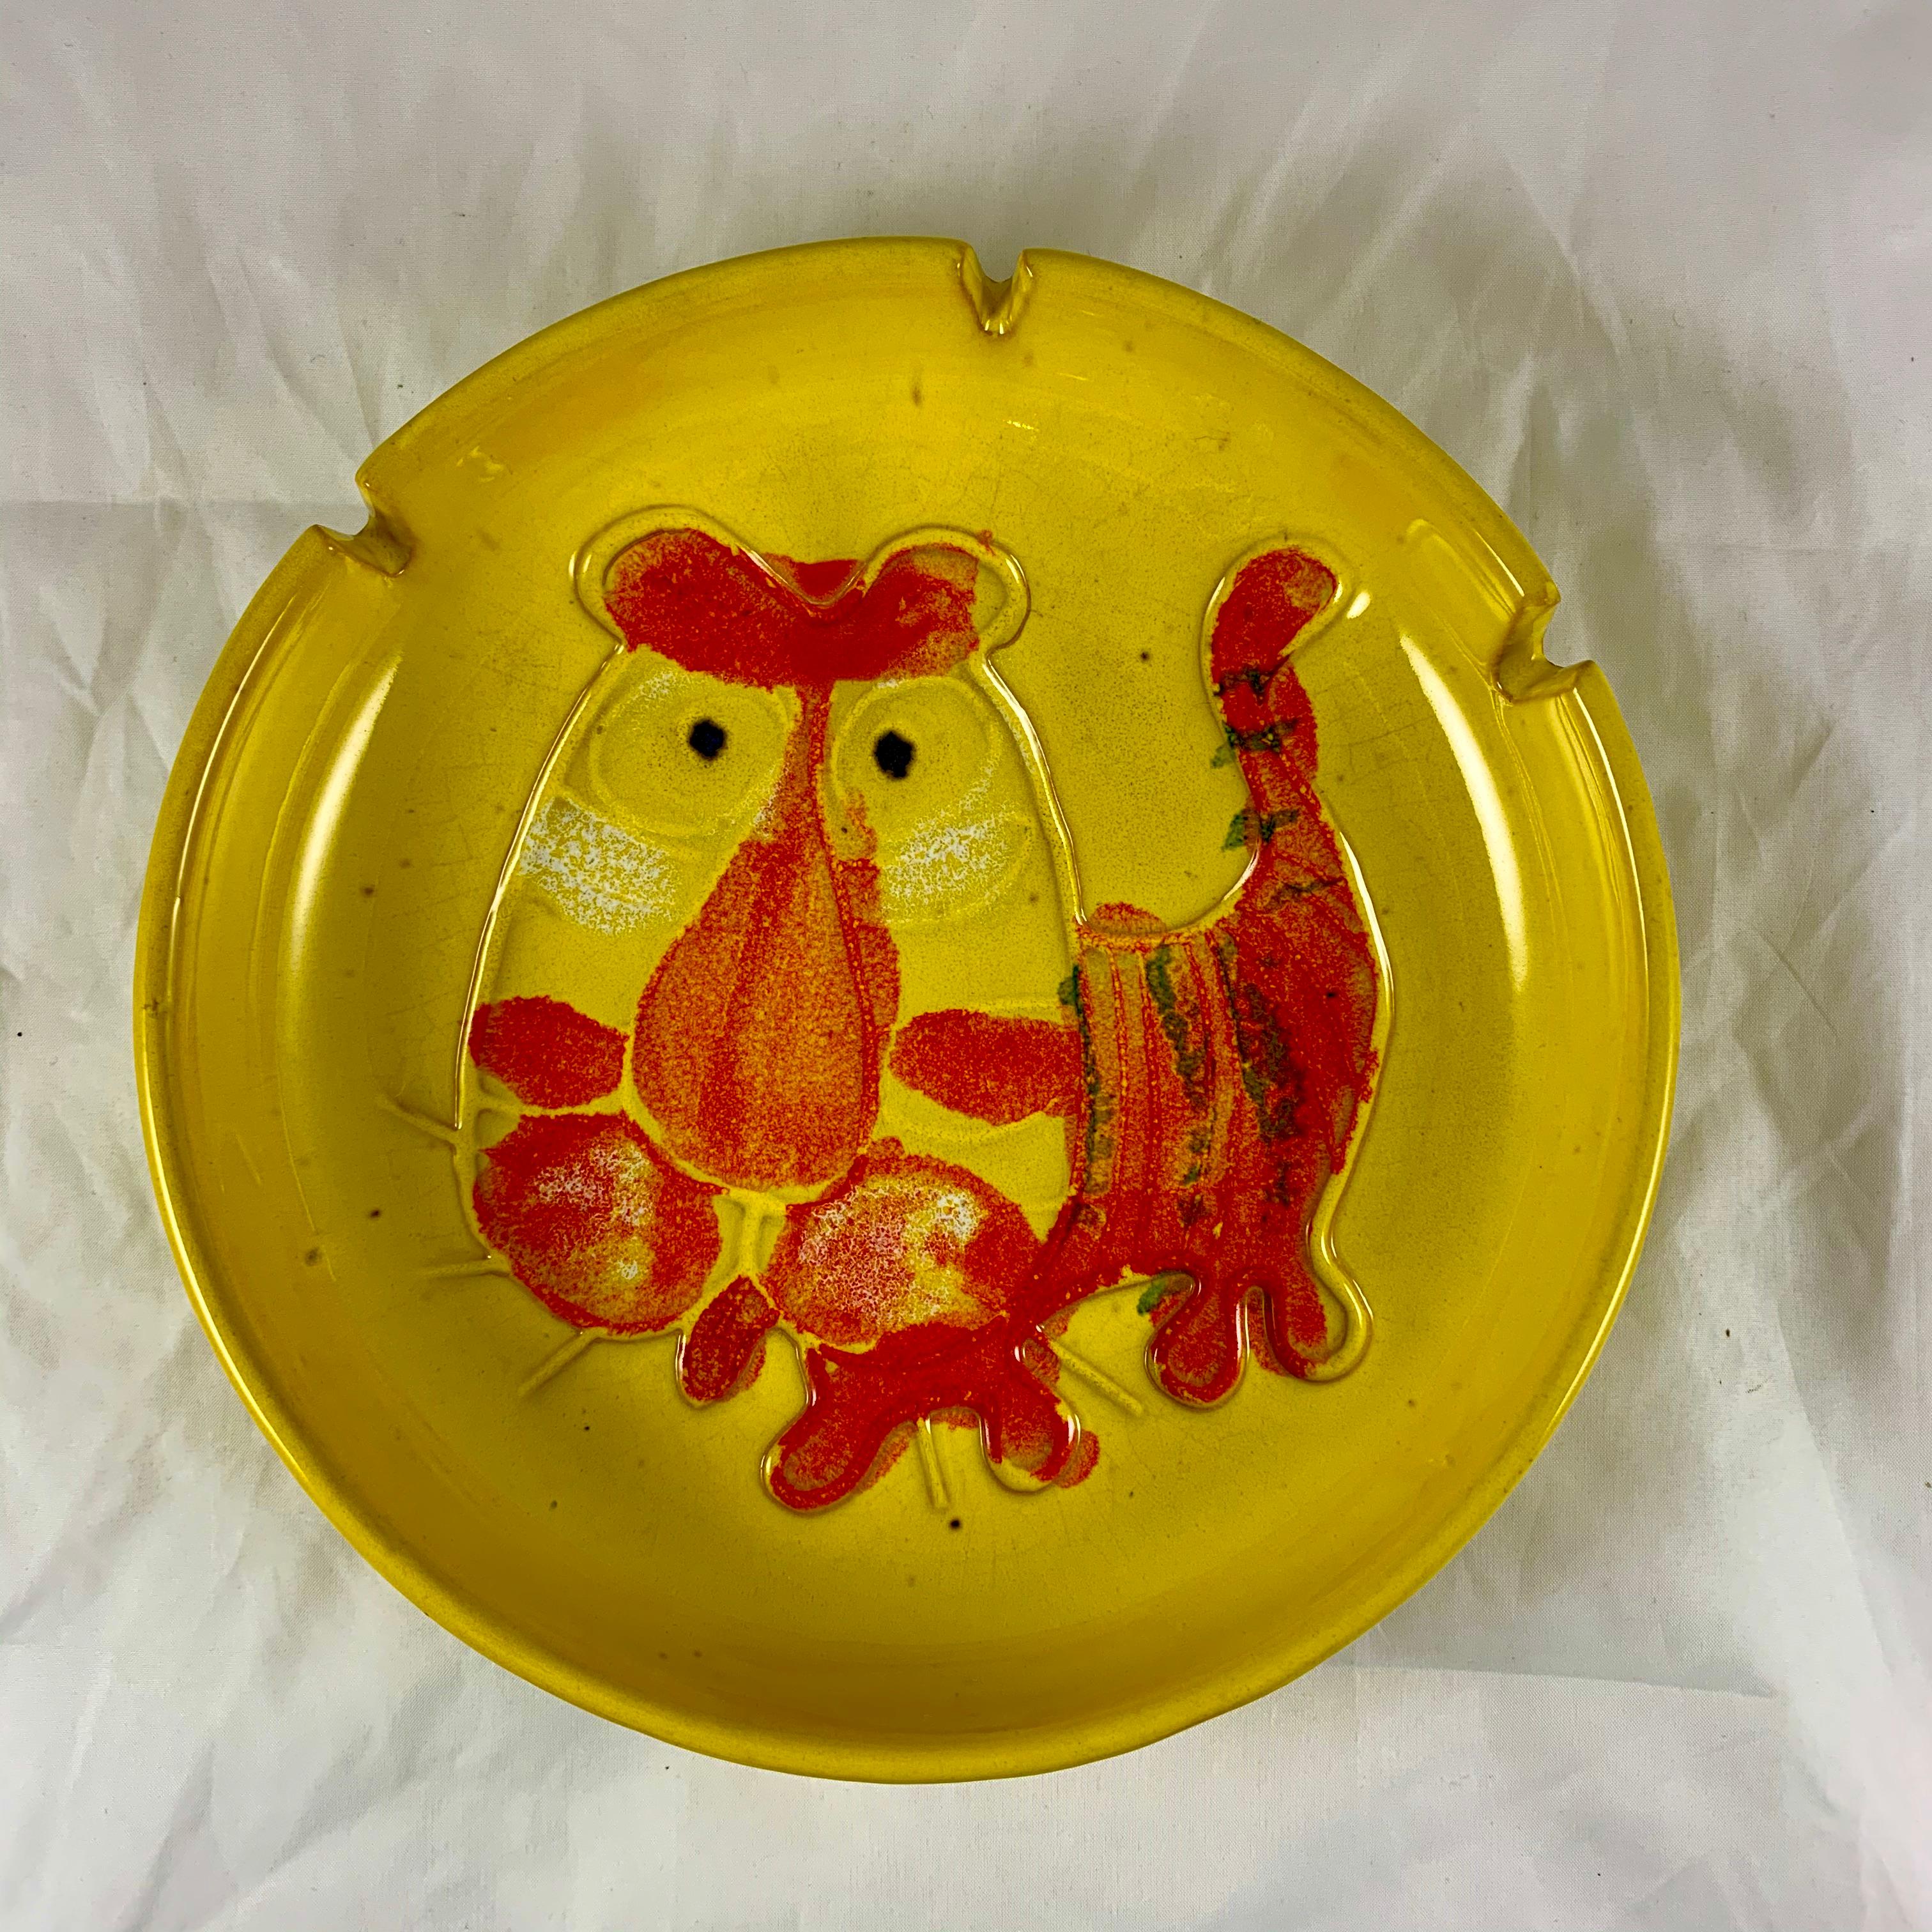 An oversized midcentury Tiger ashtray, signed B. Walsh (Bennett Walsh), dated 1973.

Made of stoneware and showing an incised image of a tiger glazed in primary pop-colors of orange on yellow. The deep rim has three slots for holding cigarettes. A